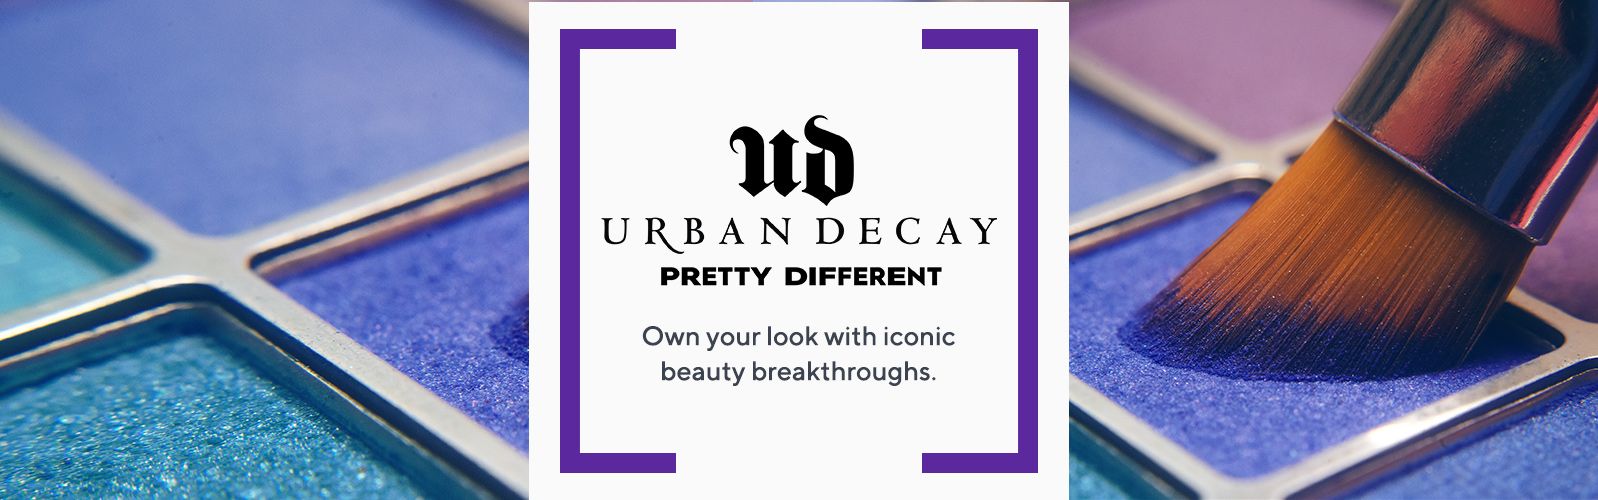 Urban Decay Pretty Different Own your look with iconic beauty breakthroughs